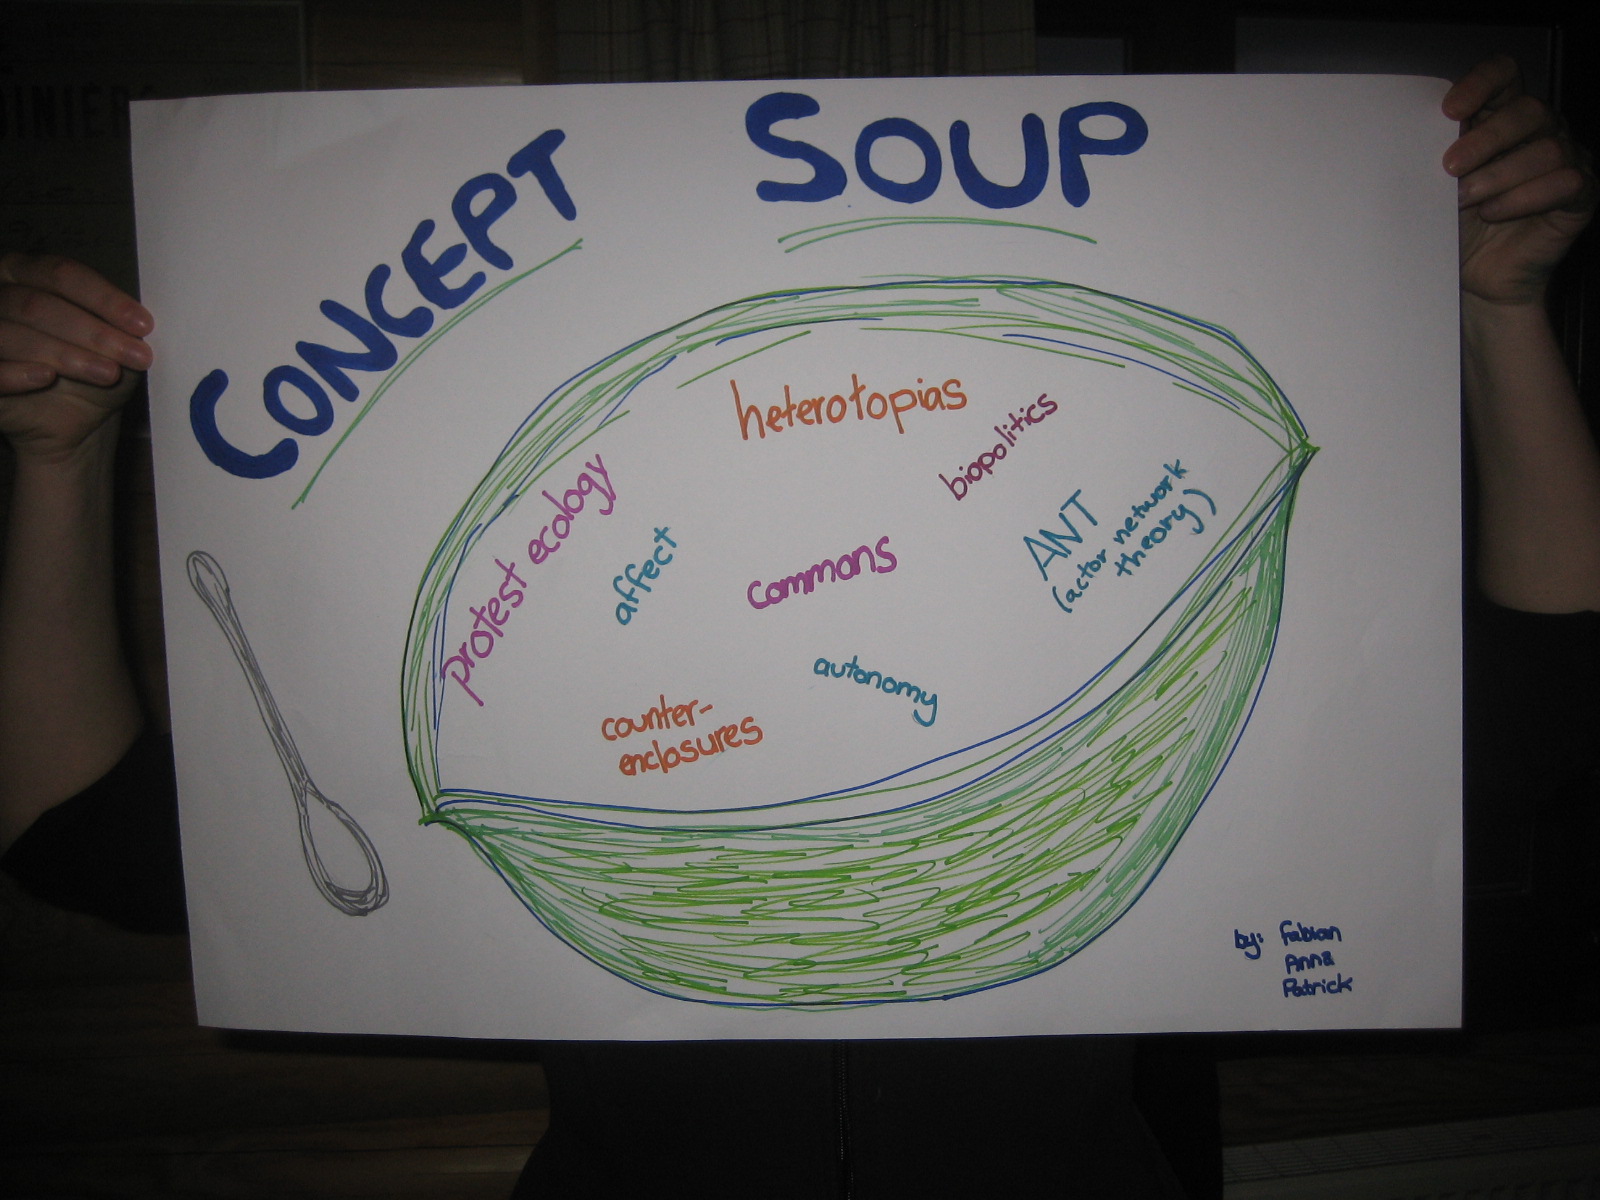 The concept soup: What to consider for the study of protest camps